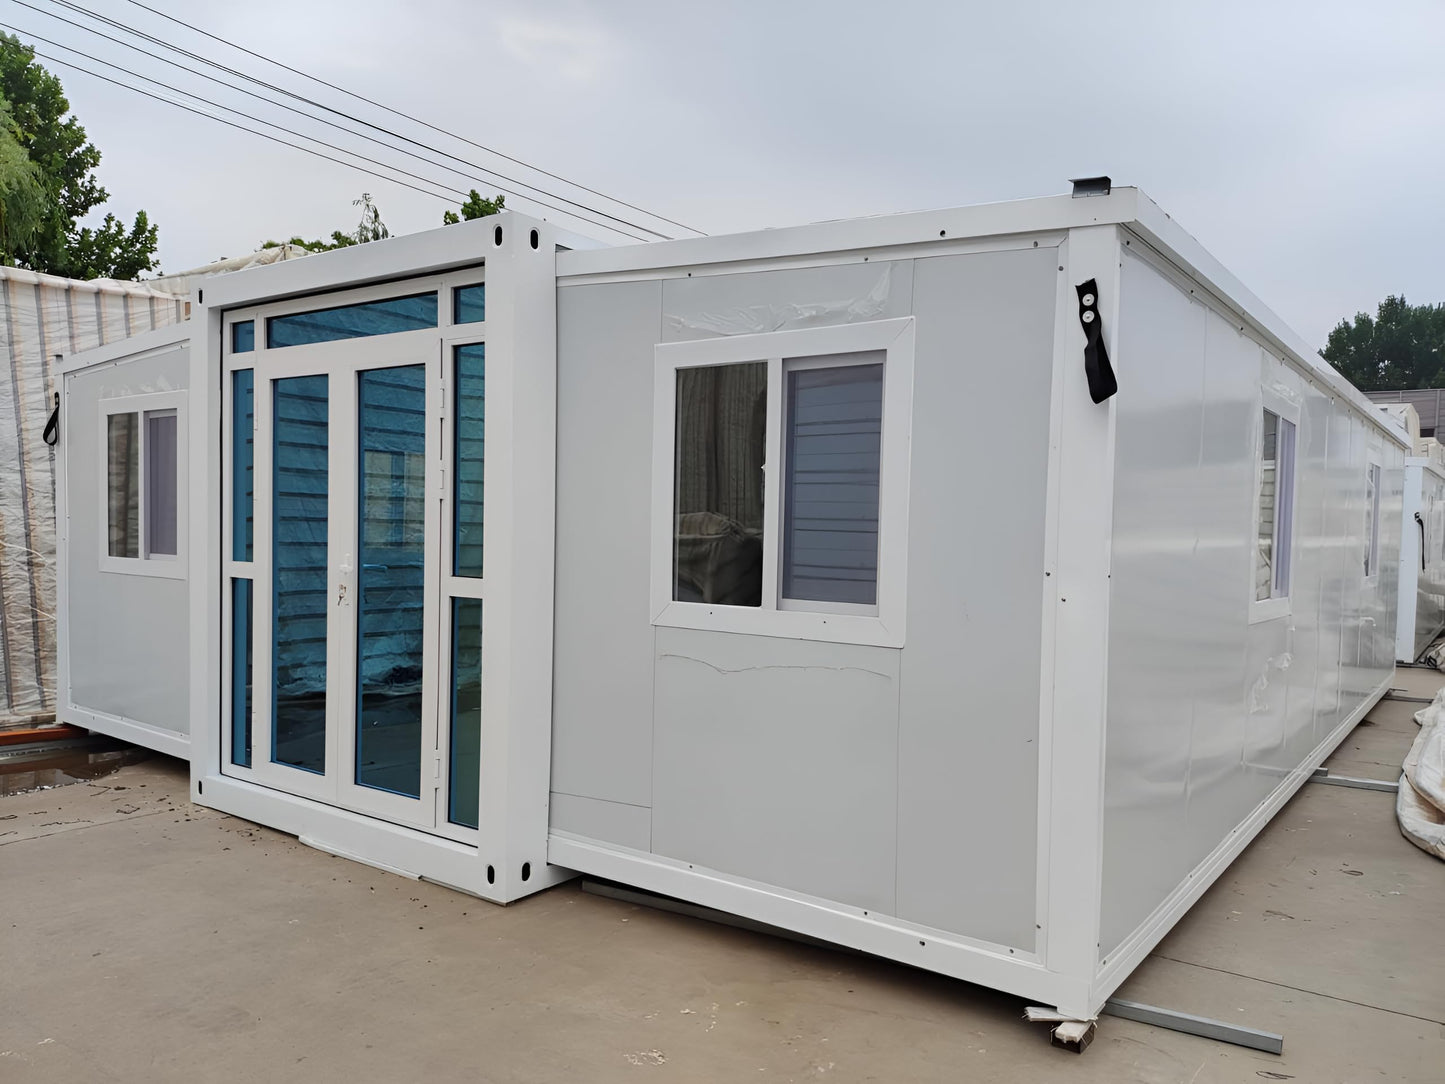 Certified Heavy Duty Prefabricated 2-Bedroom Tiny Portable Home with Restroom | Luxury Expandable Prefab Dream House for Guest House, Office, Workshop, or Airbnb Hosting (19 x 20) FT